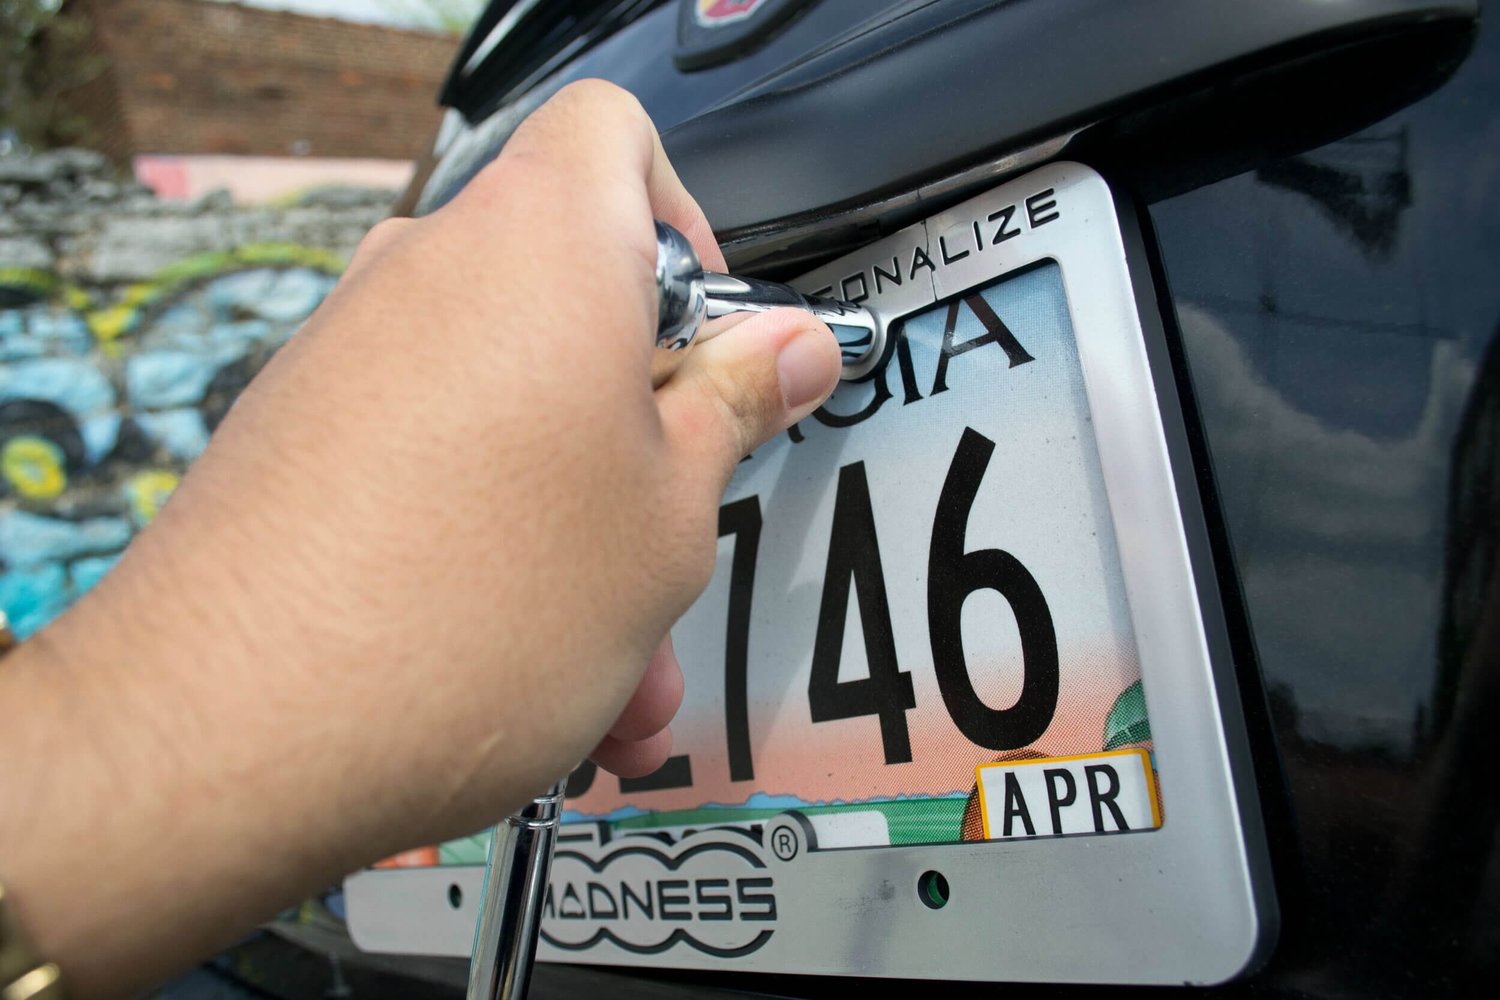 Here's Why You Should Remove Your Car's Plates When You Sell It